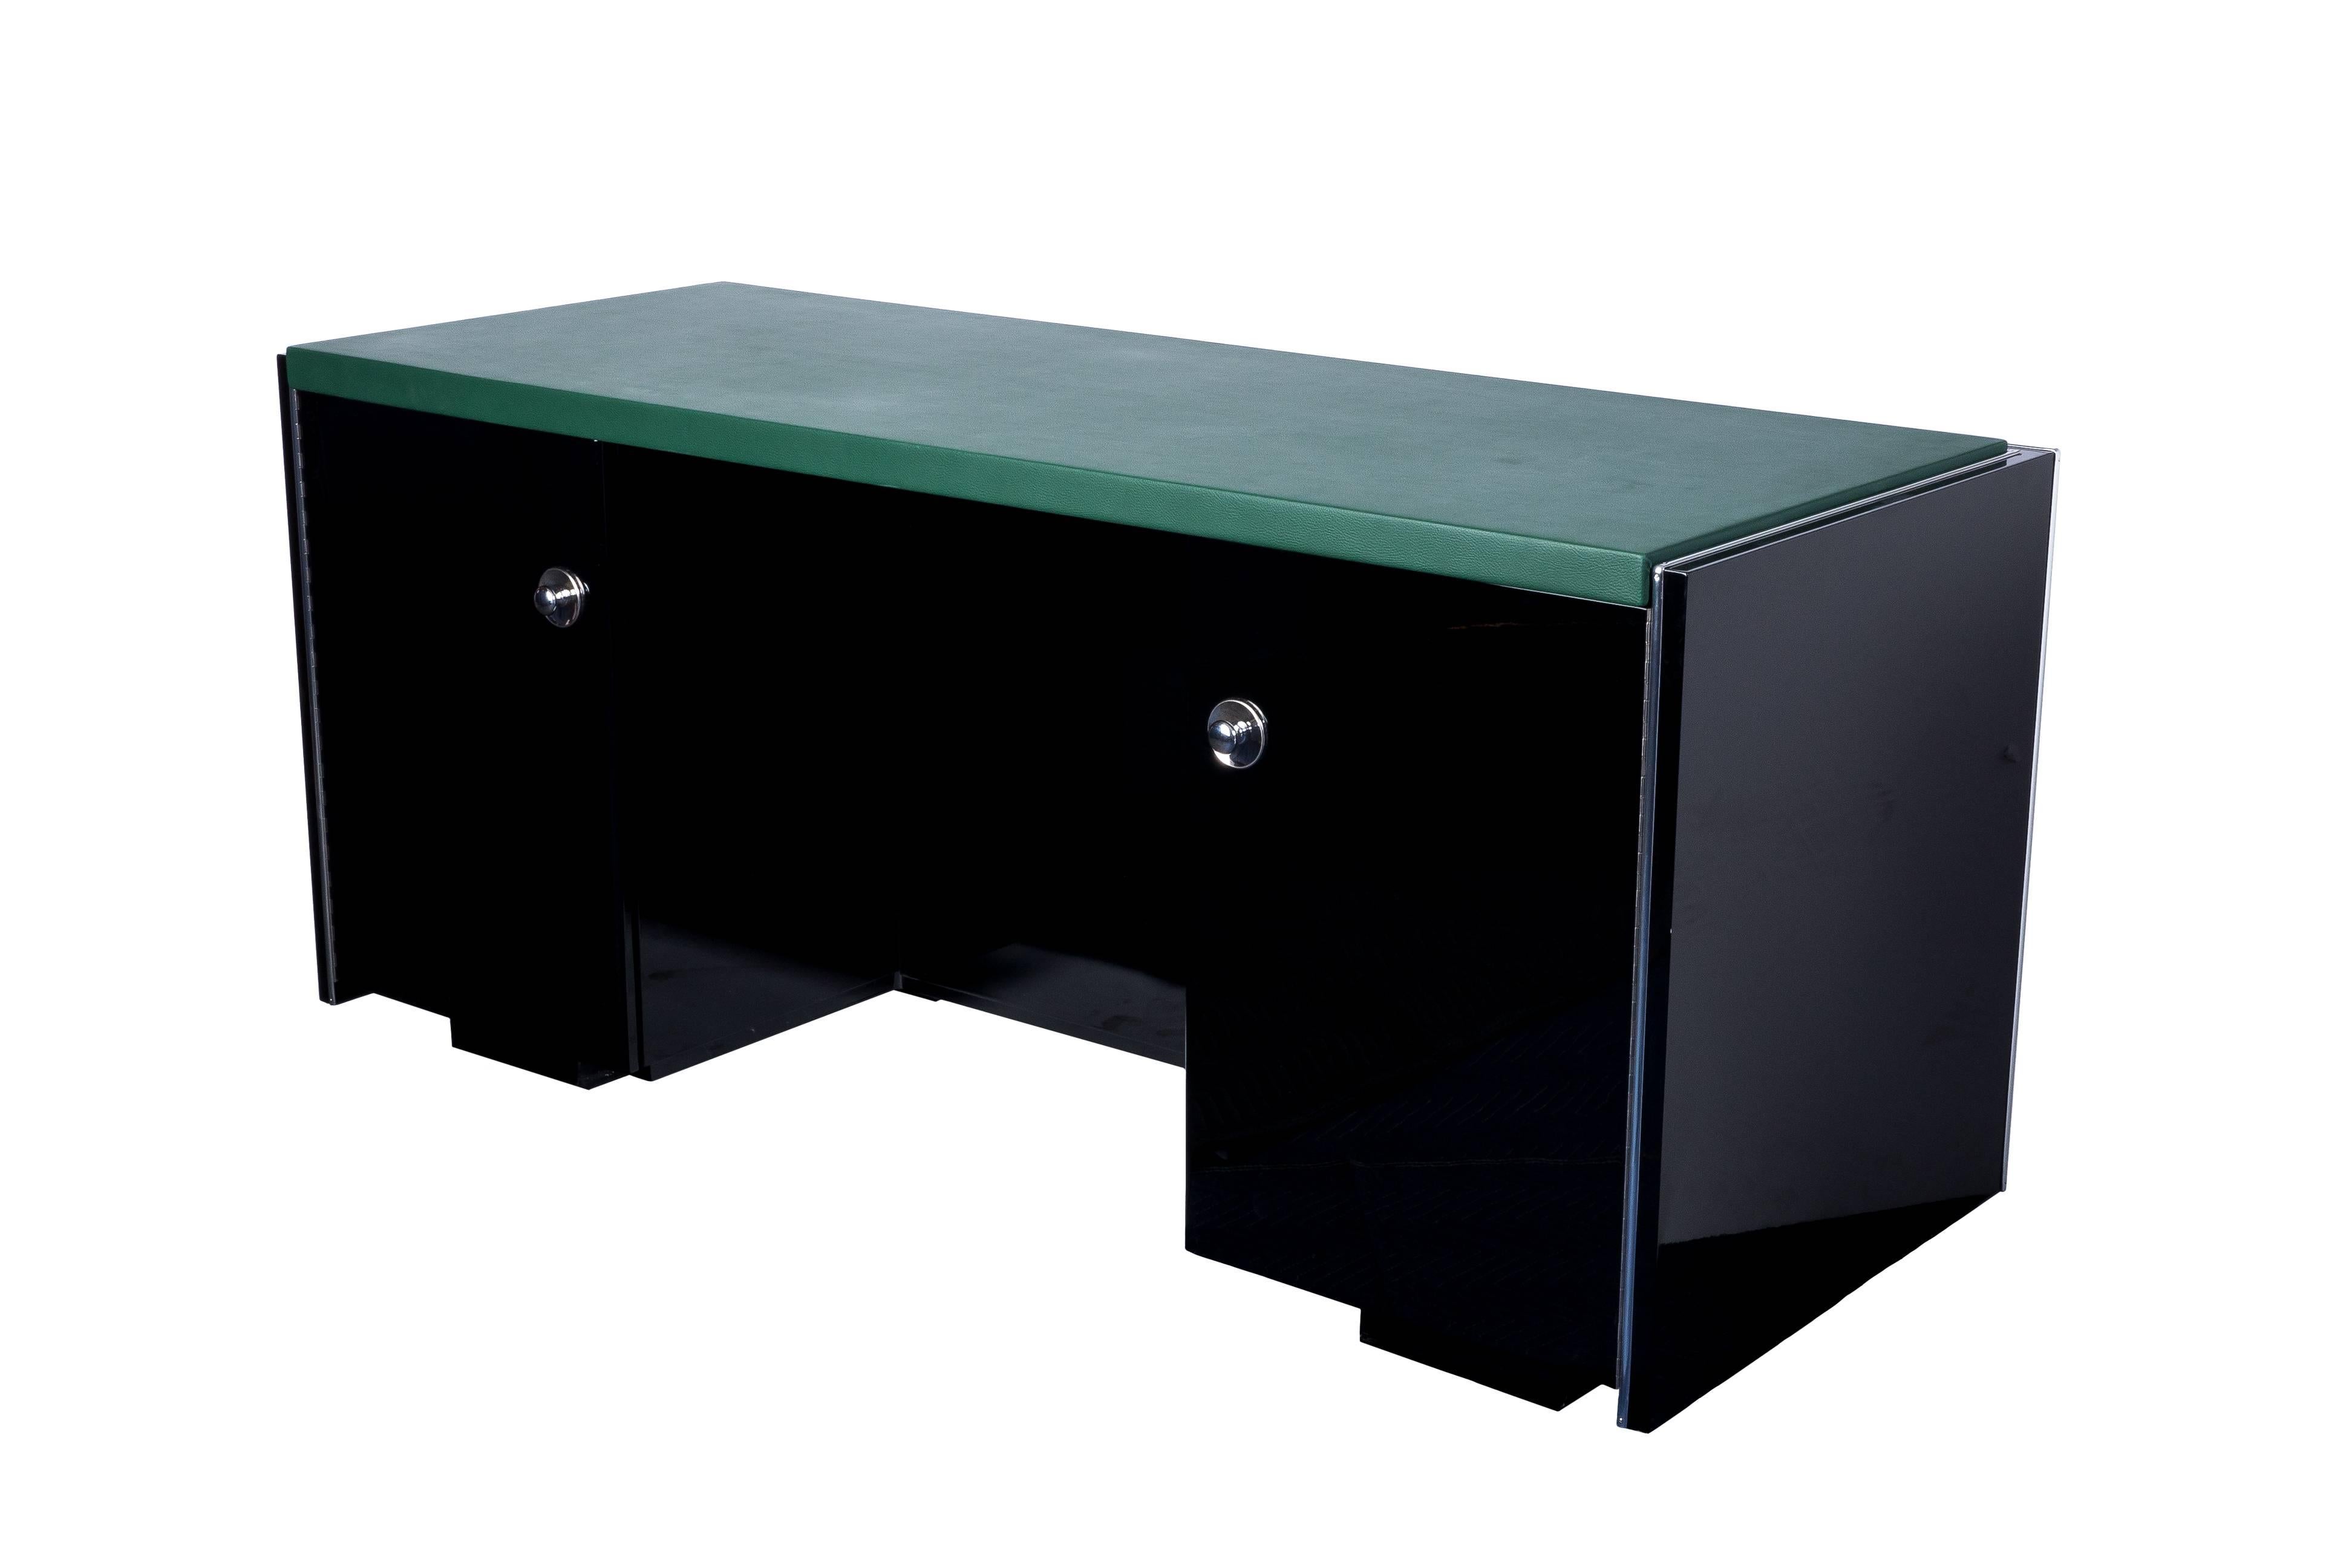 This magnificent Art Deco desk features a classic square design with a top leather-plate in moss. It is fully functional on both sides finished in a high gloss black lacquer with chrome detailing and fixtures.

Made in France, circa 1930.